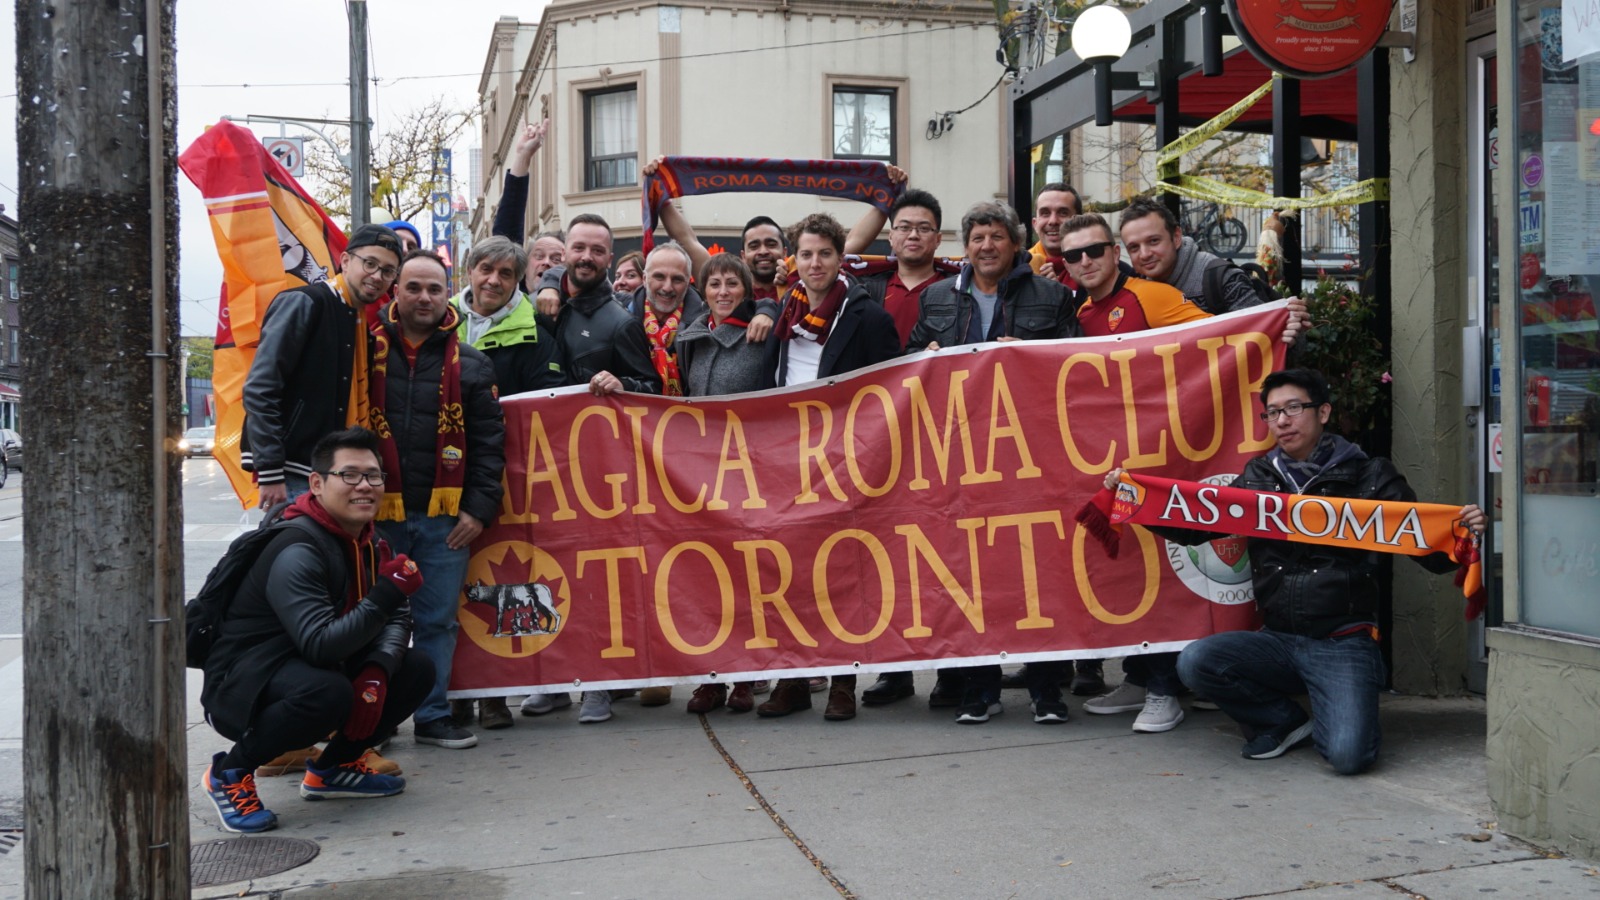 Romanisti from the Roma Club Toronto with their banner